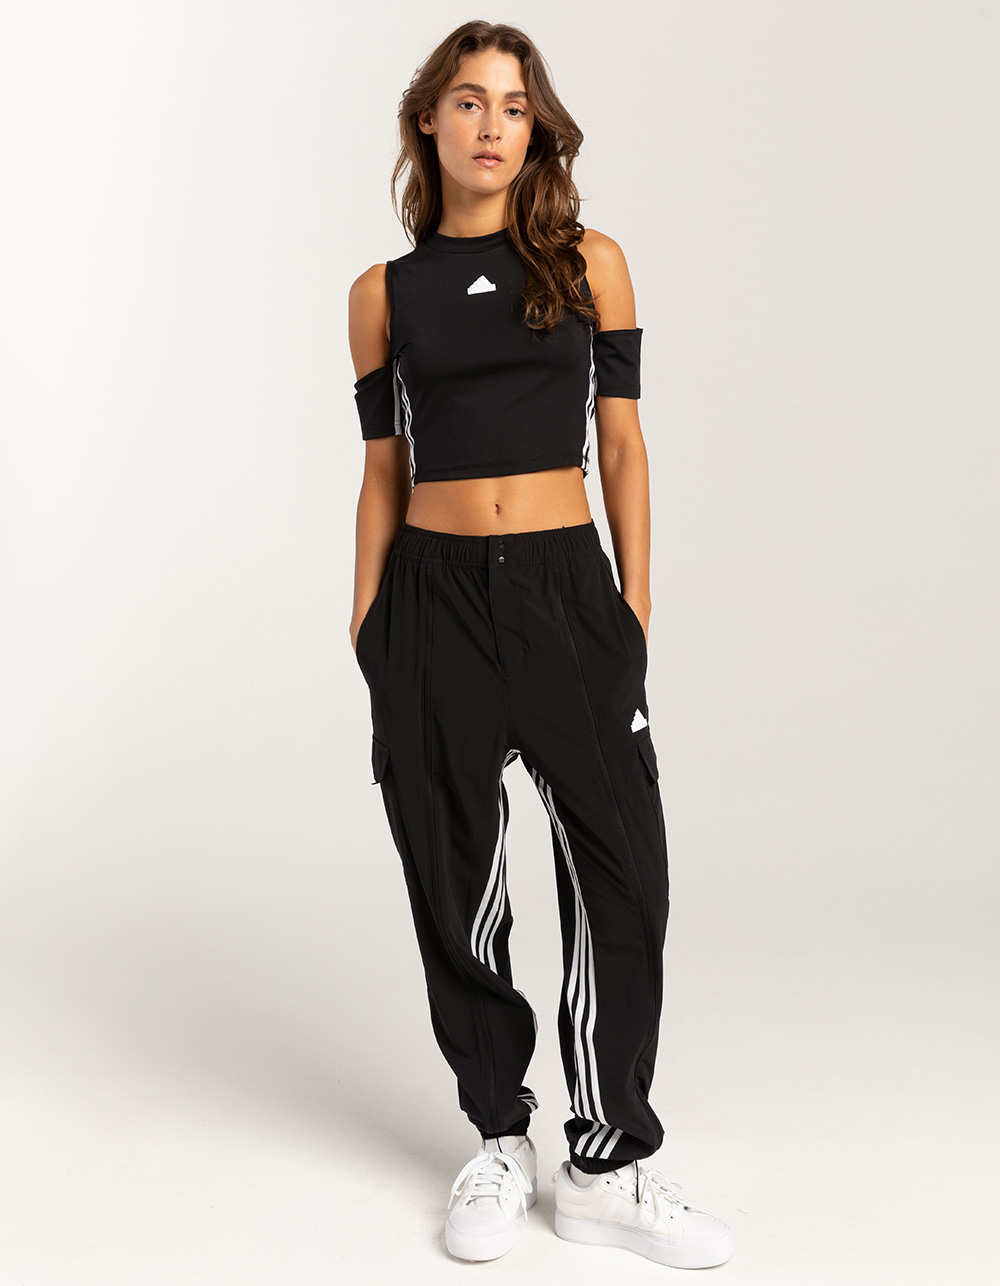 Trending Wholesale zumba cargo pants for women At Affordable